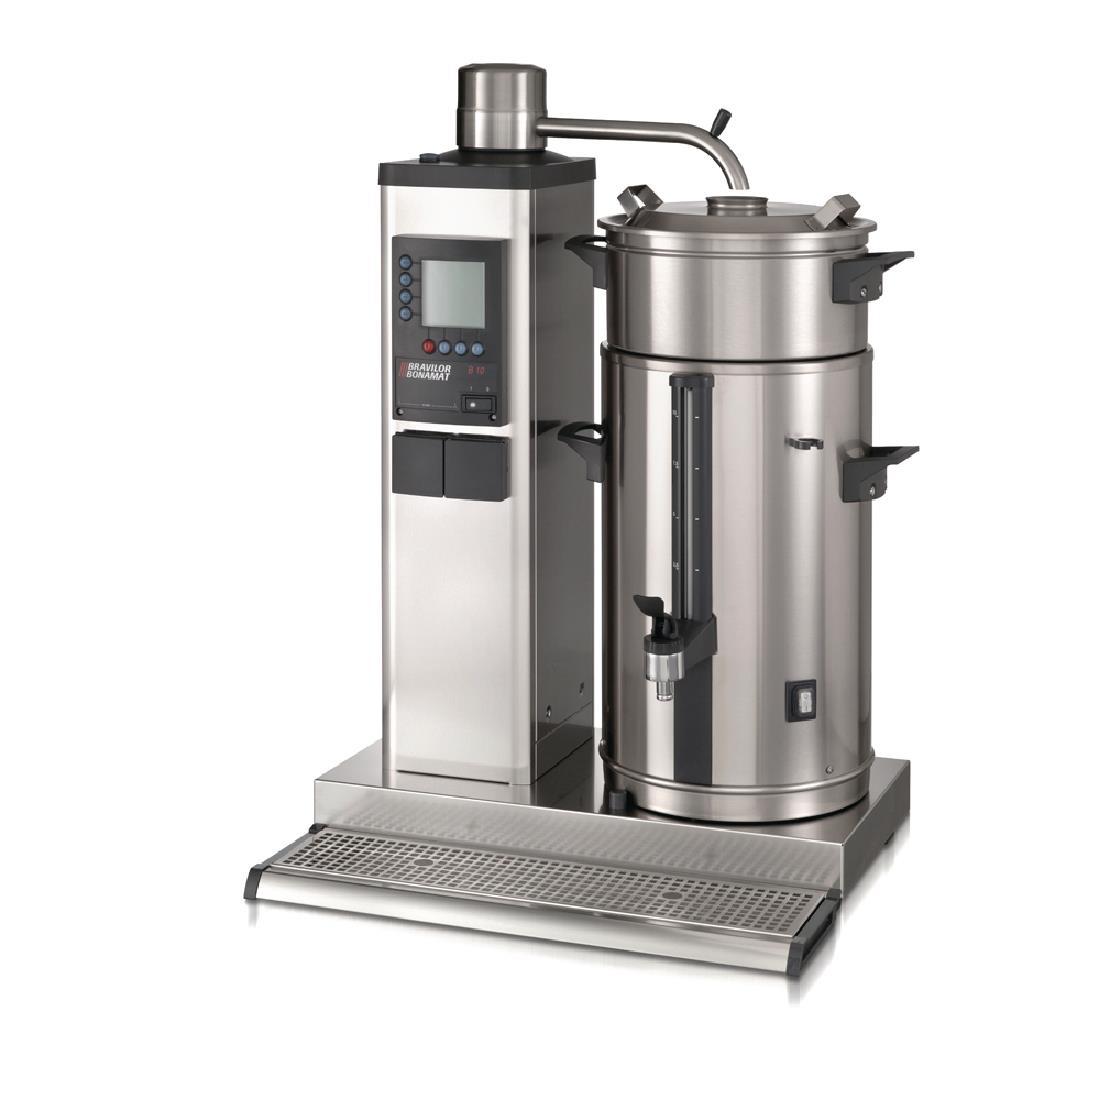 Bravilor B10 R Bulk Coffee Brewer with 10Ltr Coffee Urn Single Phase - DC677-1P  - 1